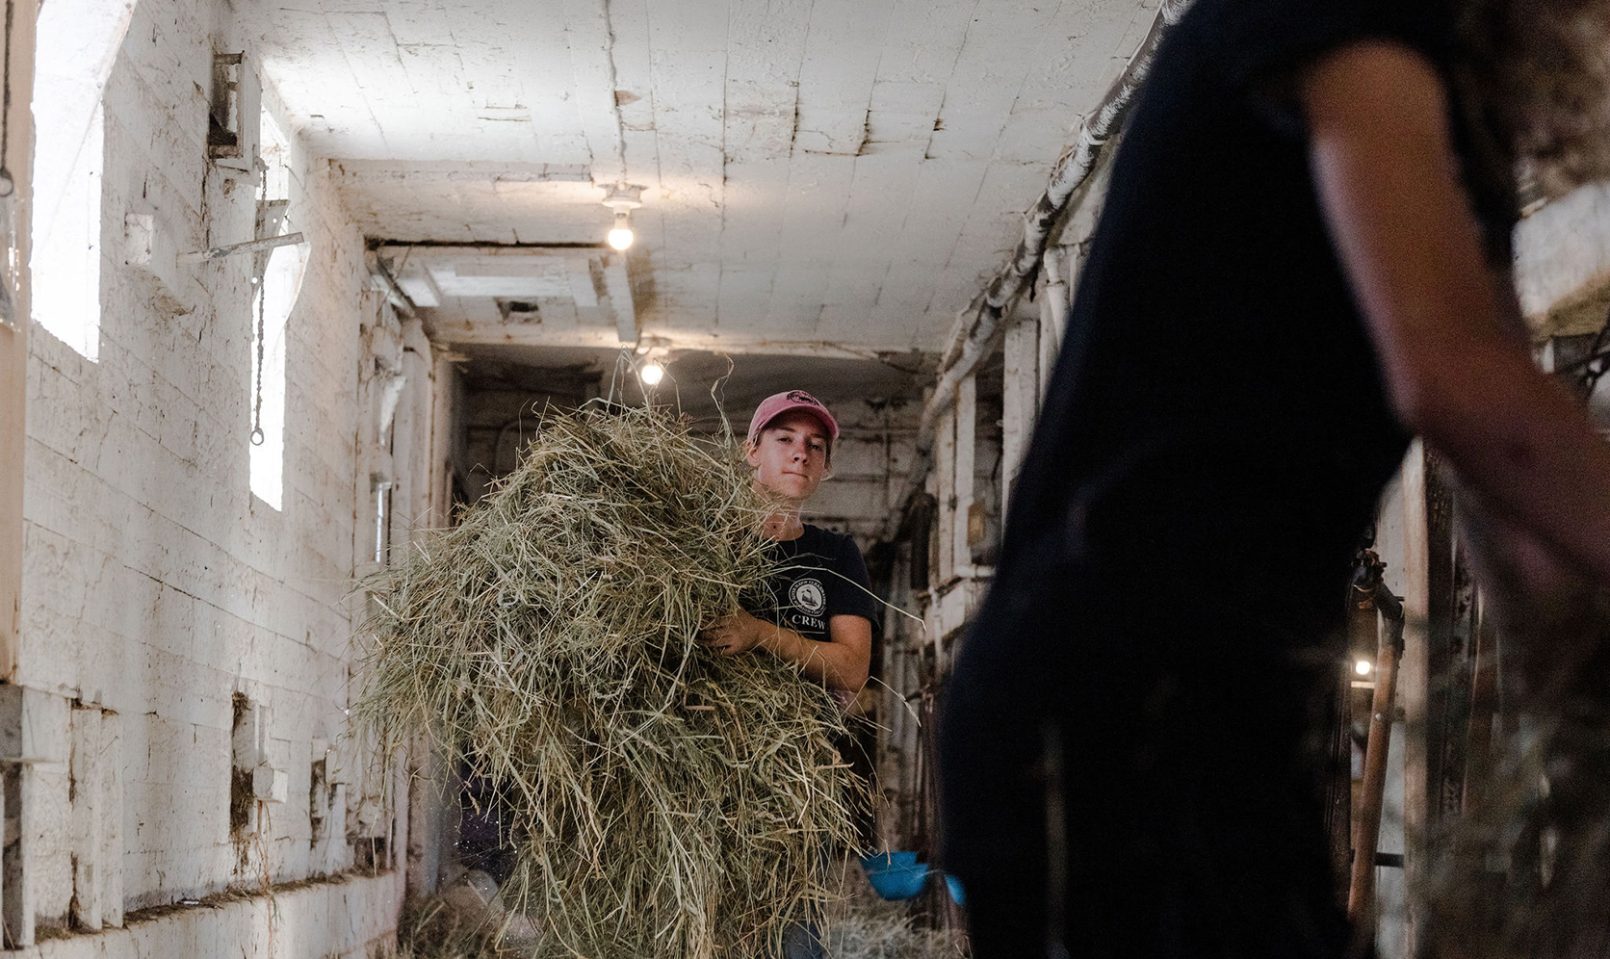 Earth Stewards farm student carrying a pile of hay through the milking barn